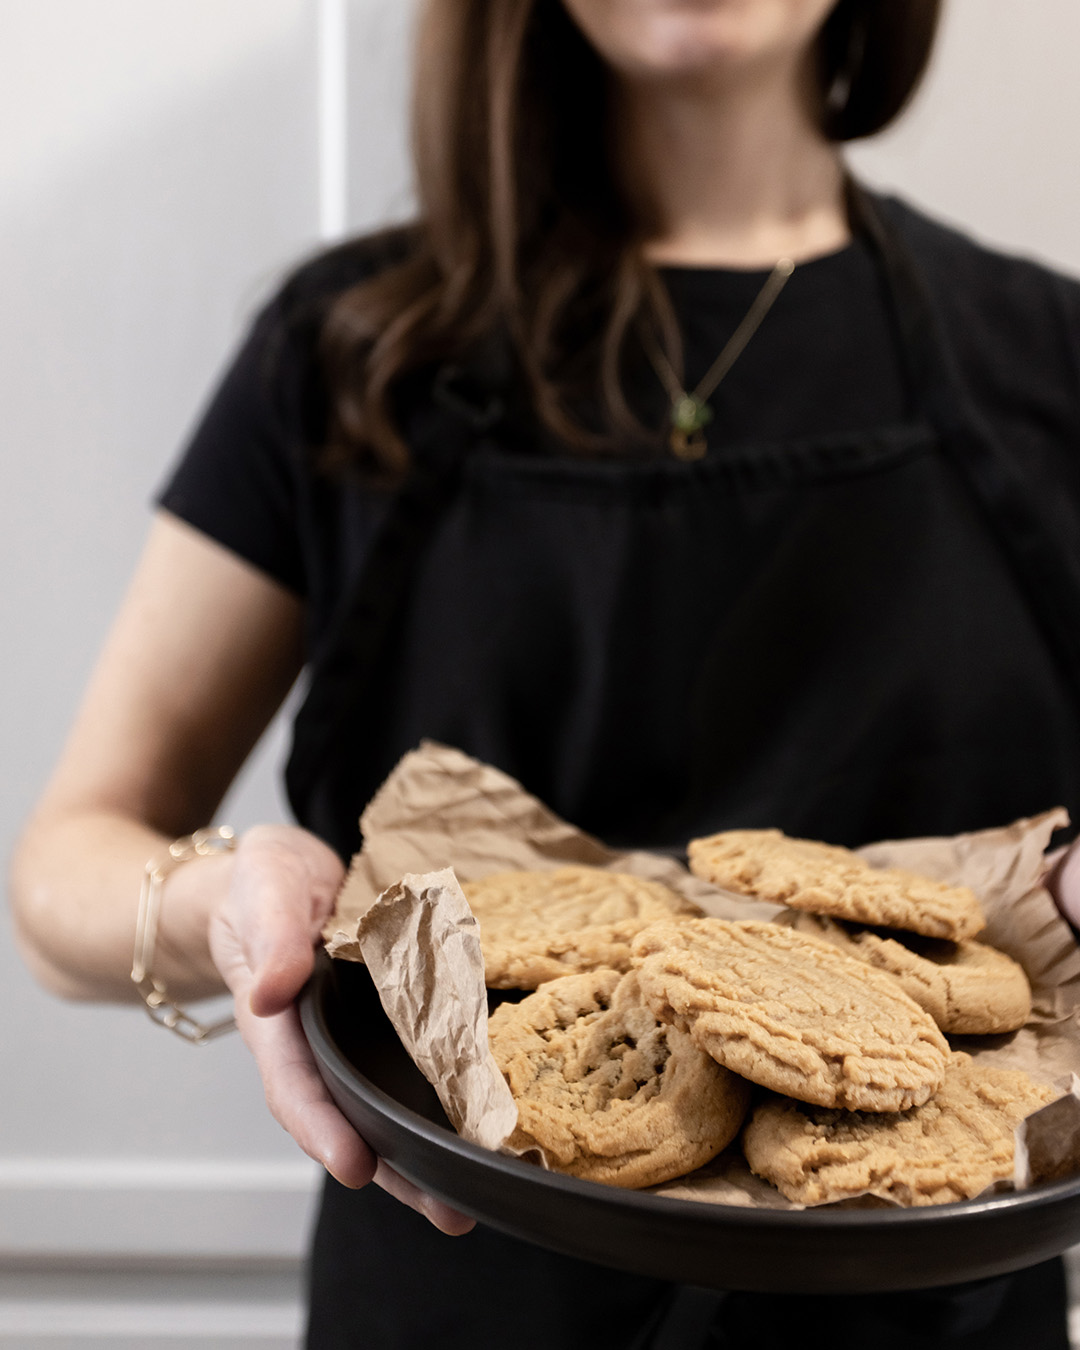 These cookies are surprisingly amazing, even if you're not typically a huge fan of most peanut butter cookies. These soft and chewy peanut butter cookies are definitely a must-try!